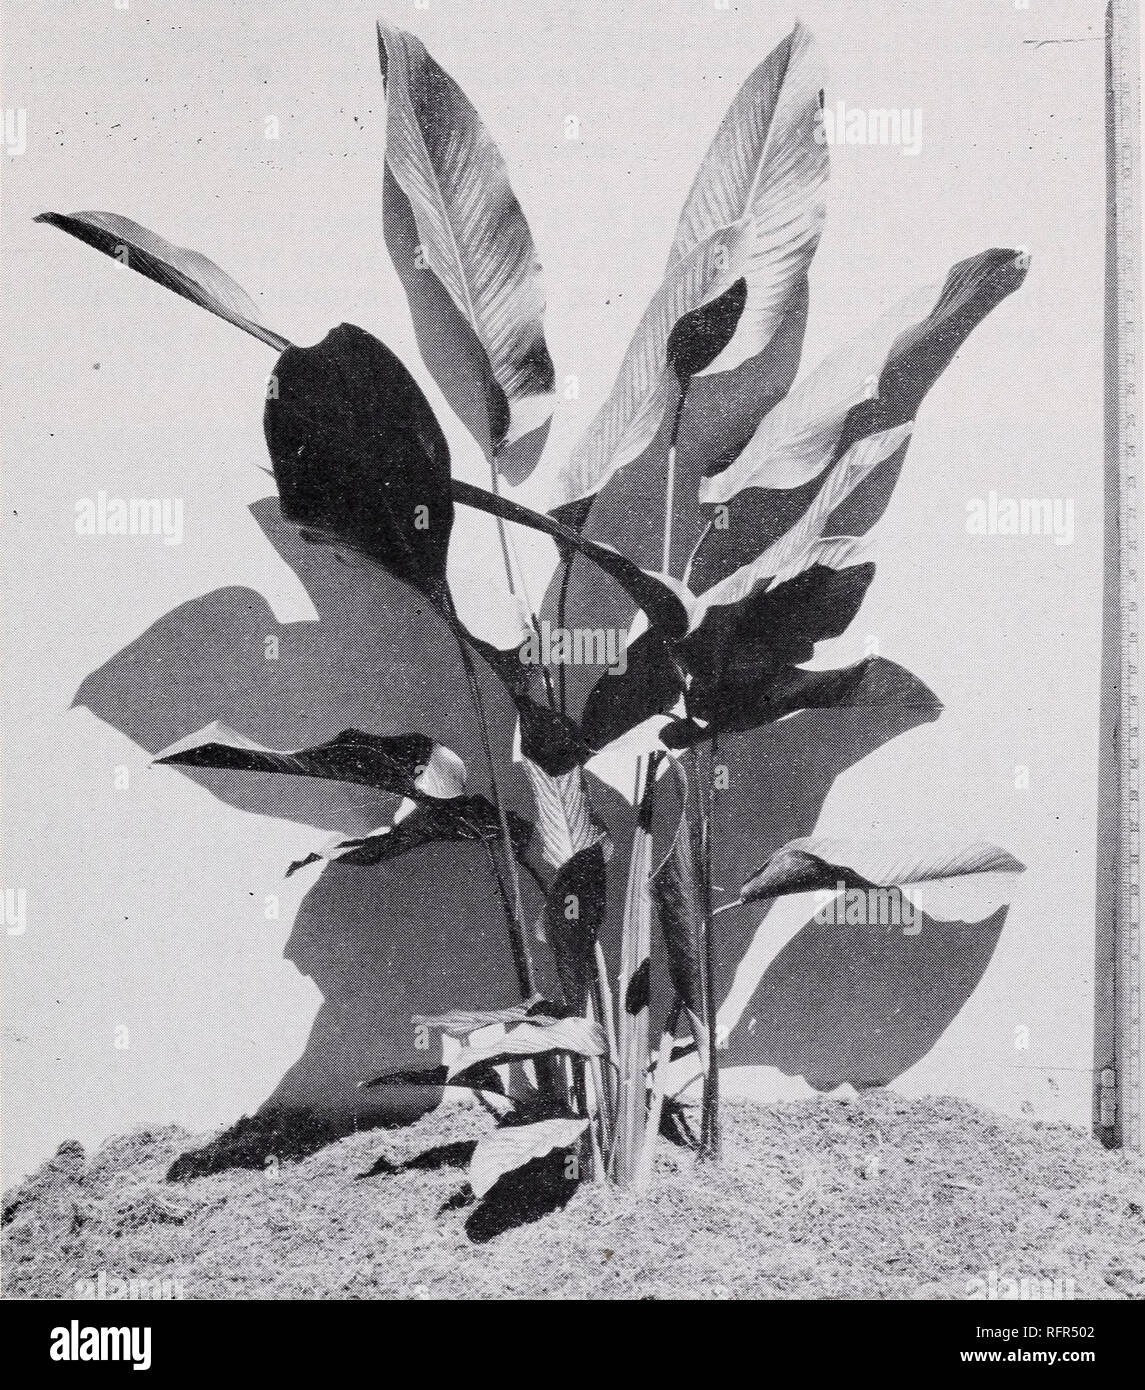 . Some large-leaved ornamental plants for the tropics. Plants, Ornamental; Tropical plants. SOME LARGE-LEAVED ORNAMENTAL PLANTS 33 m. Figure 20.—Leaves of Calathea ornata are marked with pink stripes when young which turn white at maturity and green with age. soil conditions. Propagation is by division of the rhizomes or by seed. Calathea vandenheckei Regel Synonyms: C. picturata, Maranta vandenhecki Vandenheck Calathea (fig-. 19, B) Marantaceae This species produces tufted plants 1 to 2V2 feet high usually with two leaves per growth but varying from one to three. The elliptic or ovate leaves  Stock Photo